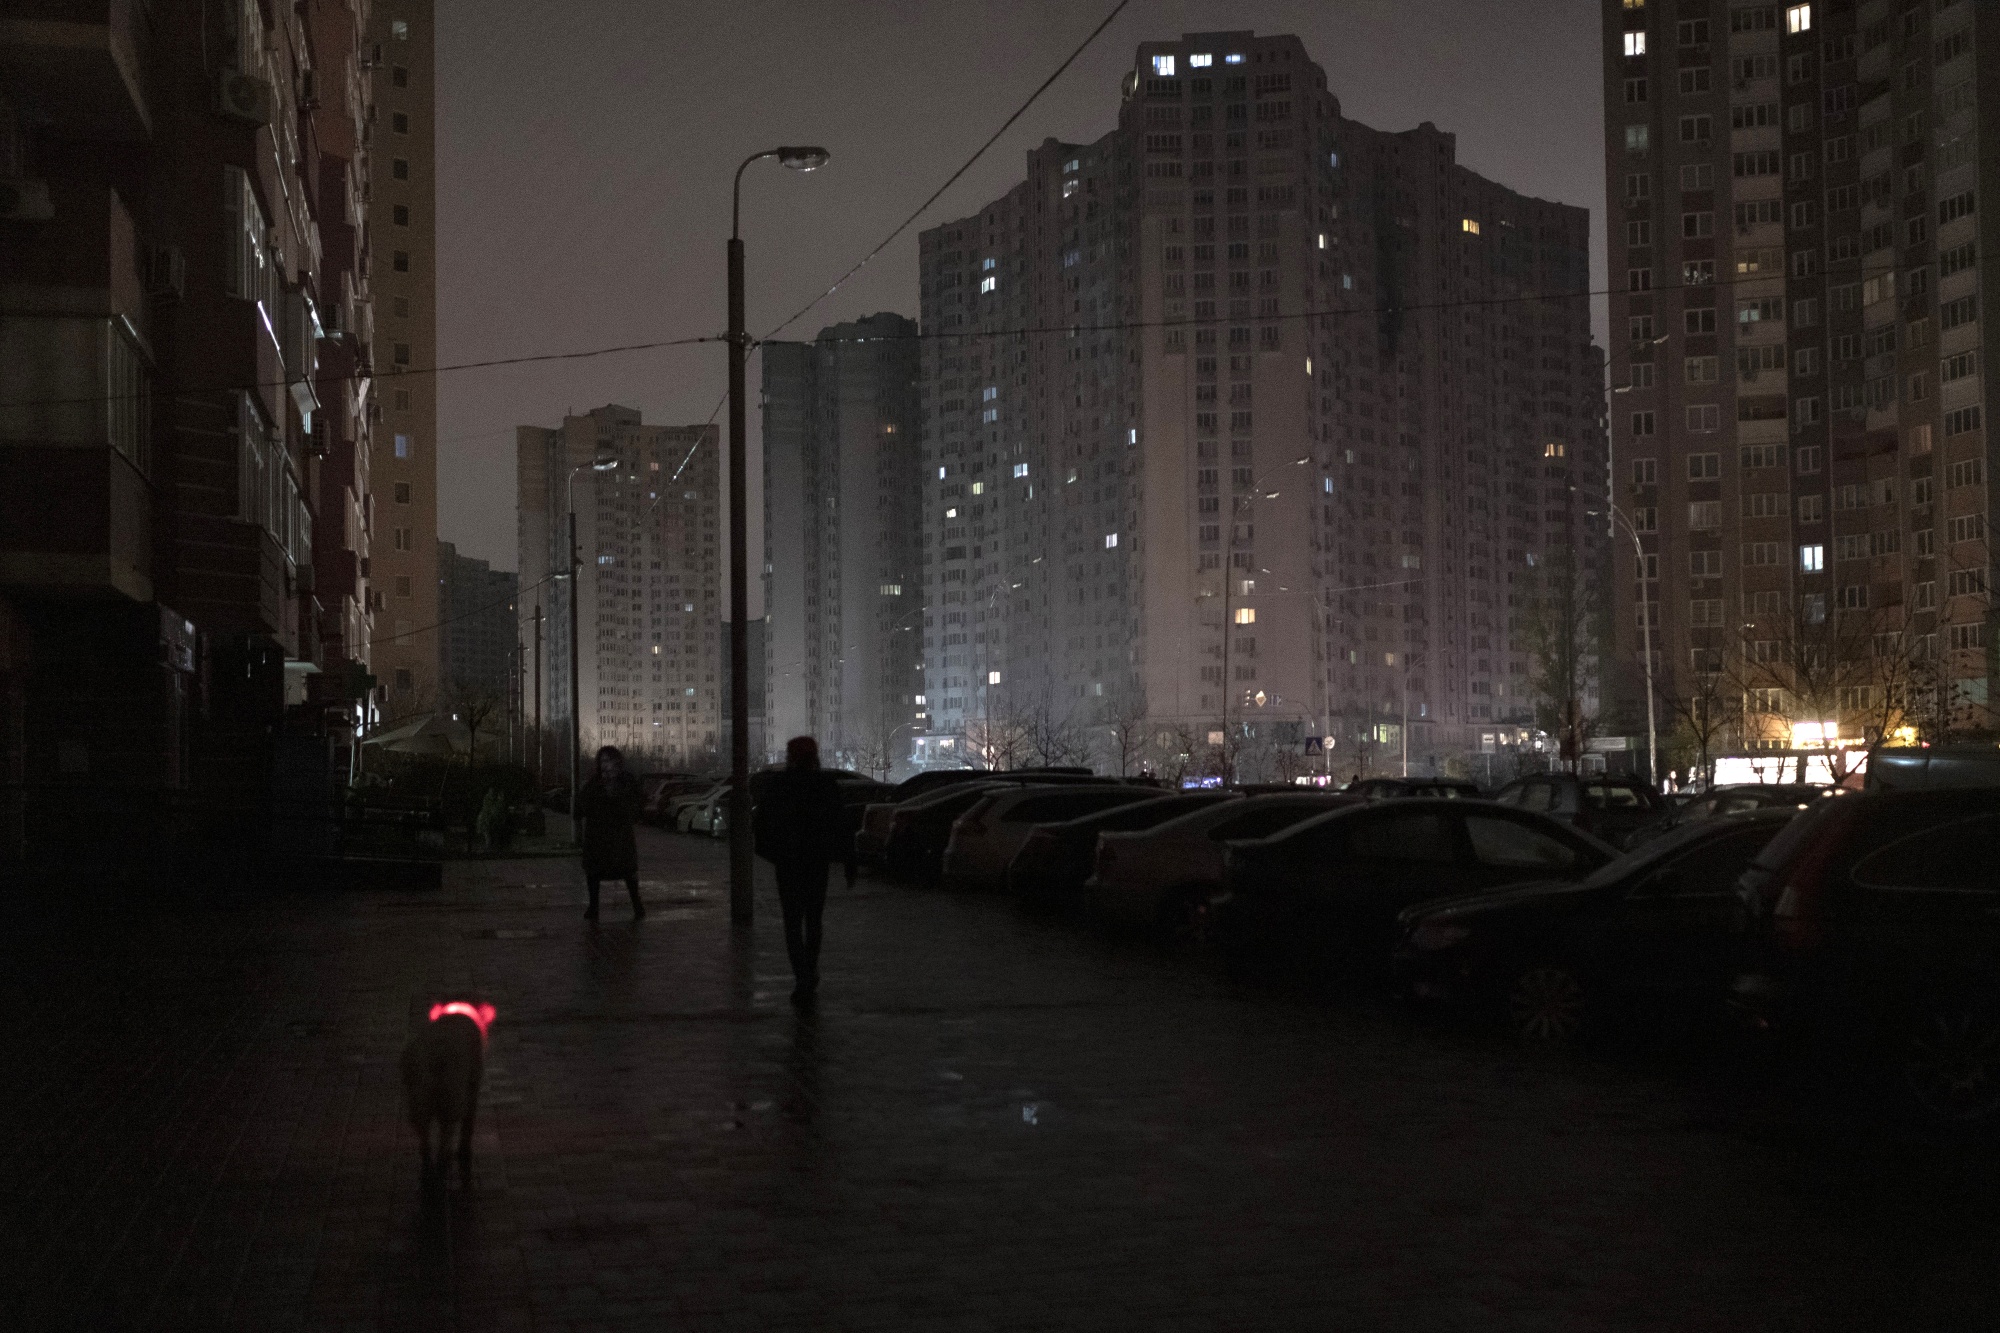 A dog with a lit up collar walks in a street during a blackout in Kyiv, on Nov. 16.